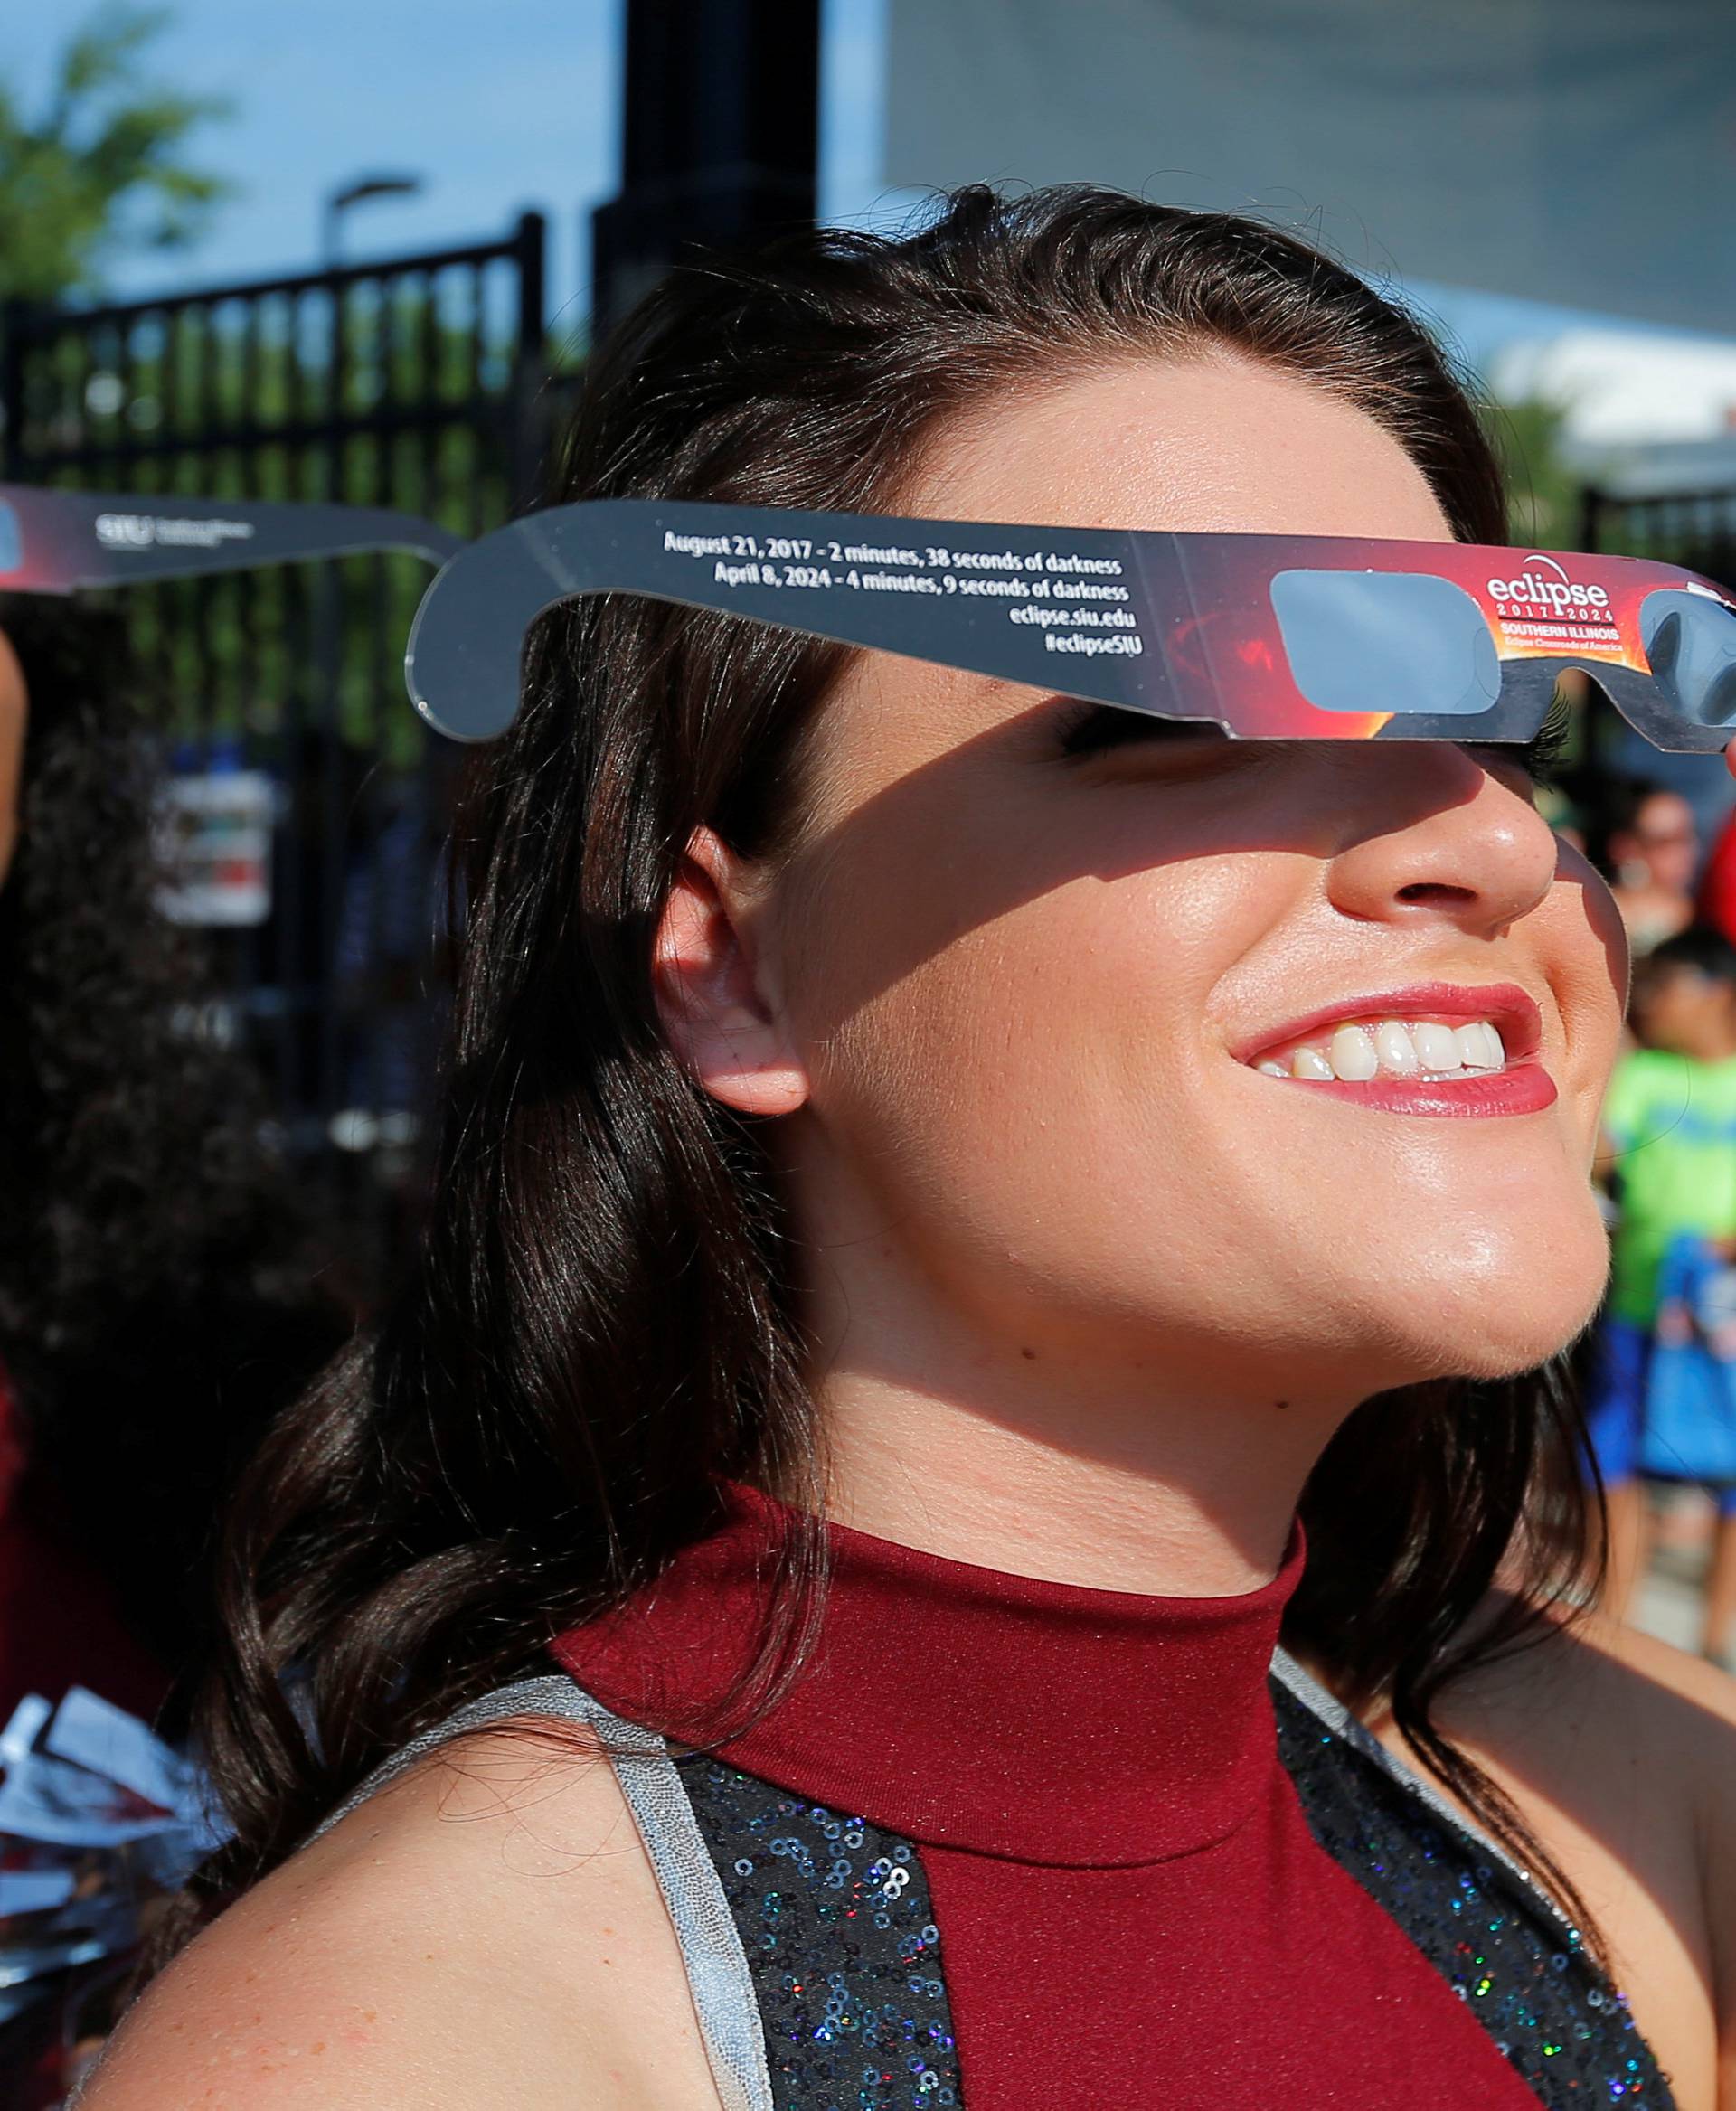 Cheerleaders use solar viewing glasses before welcoming guests to the football stadium to watch the total solar eclipse at Southern Illinois University in Carbondale